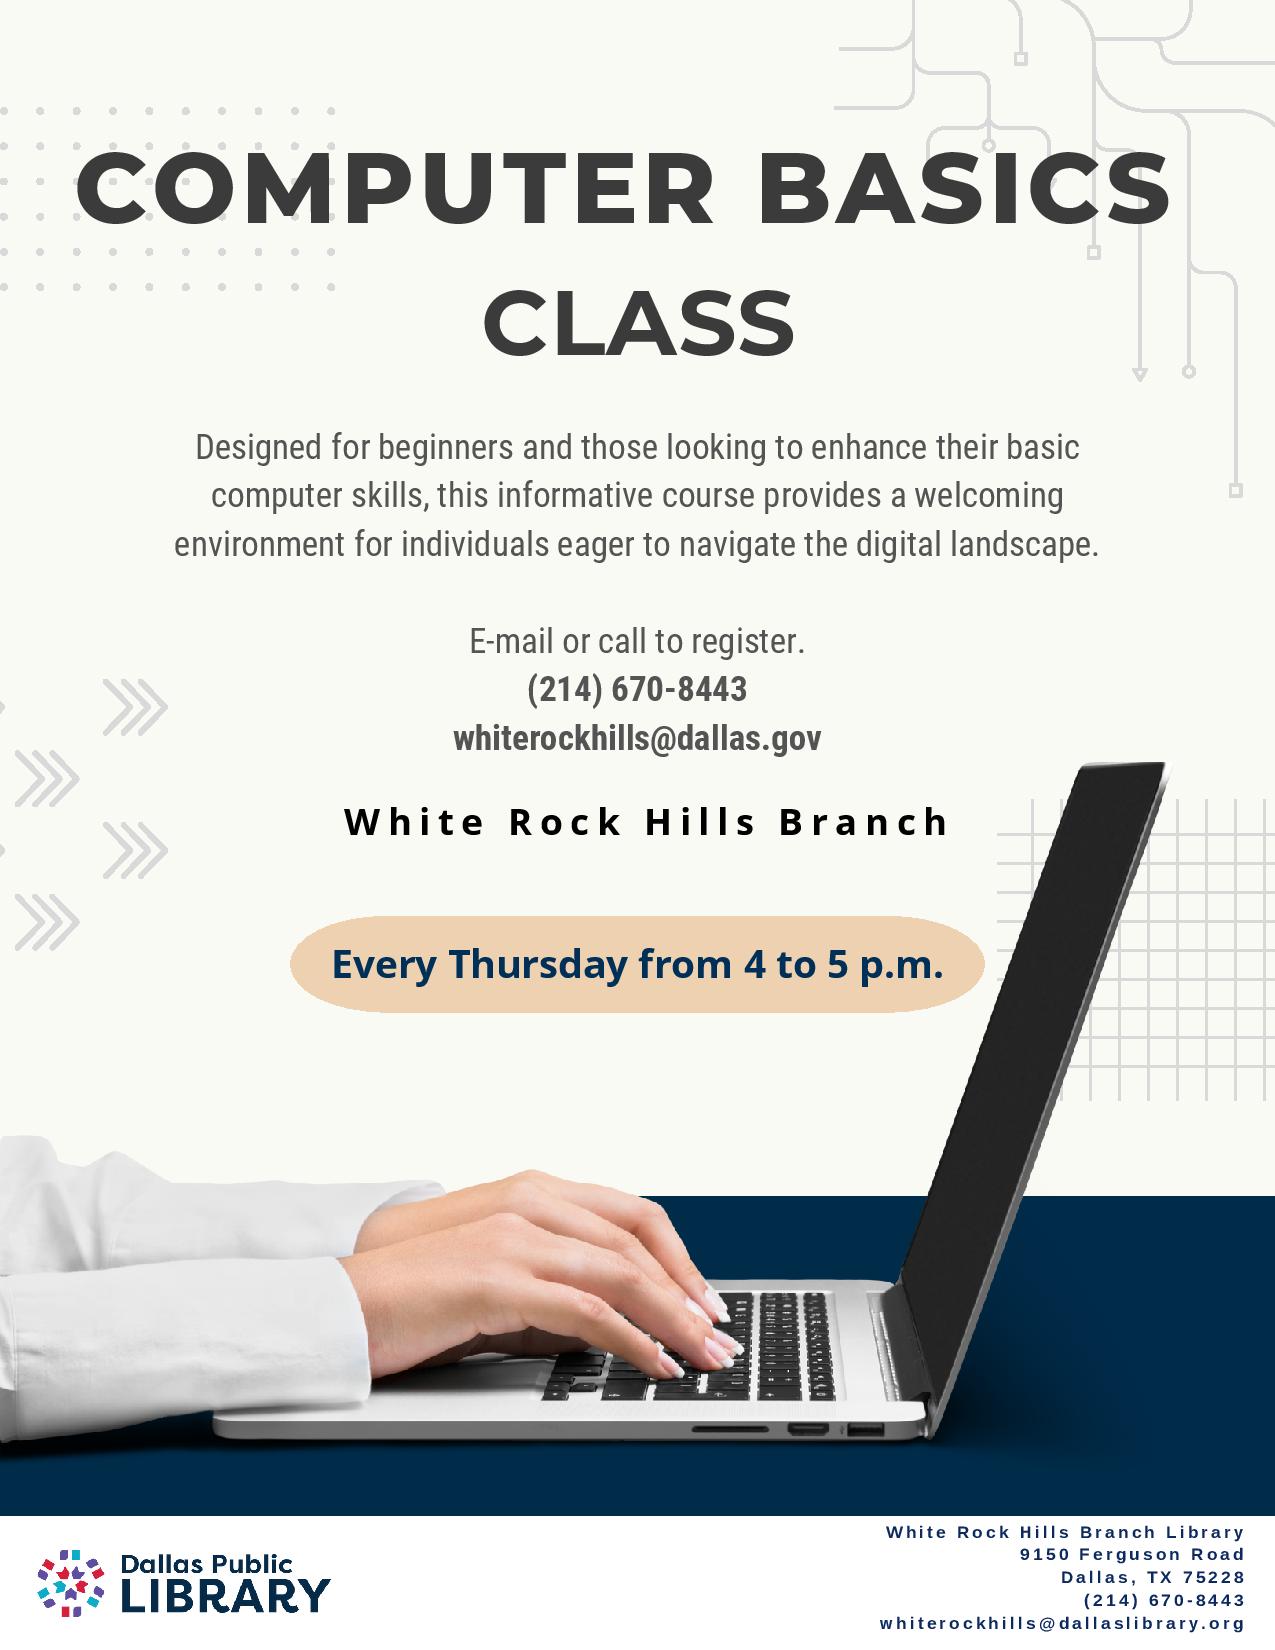 computer basics flyer. image of someone's hands on a laptop typing. text reads: Designed for beginners and those looking to enhance their basic computer skills, this informative course provides a welcoming environment for individuals eager to navigate the digital landscape. E-mail or call to register. (214) 670-8443 whiterockhills@dallas.gov